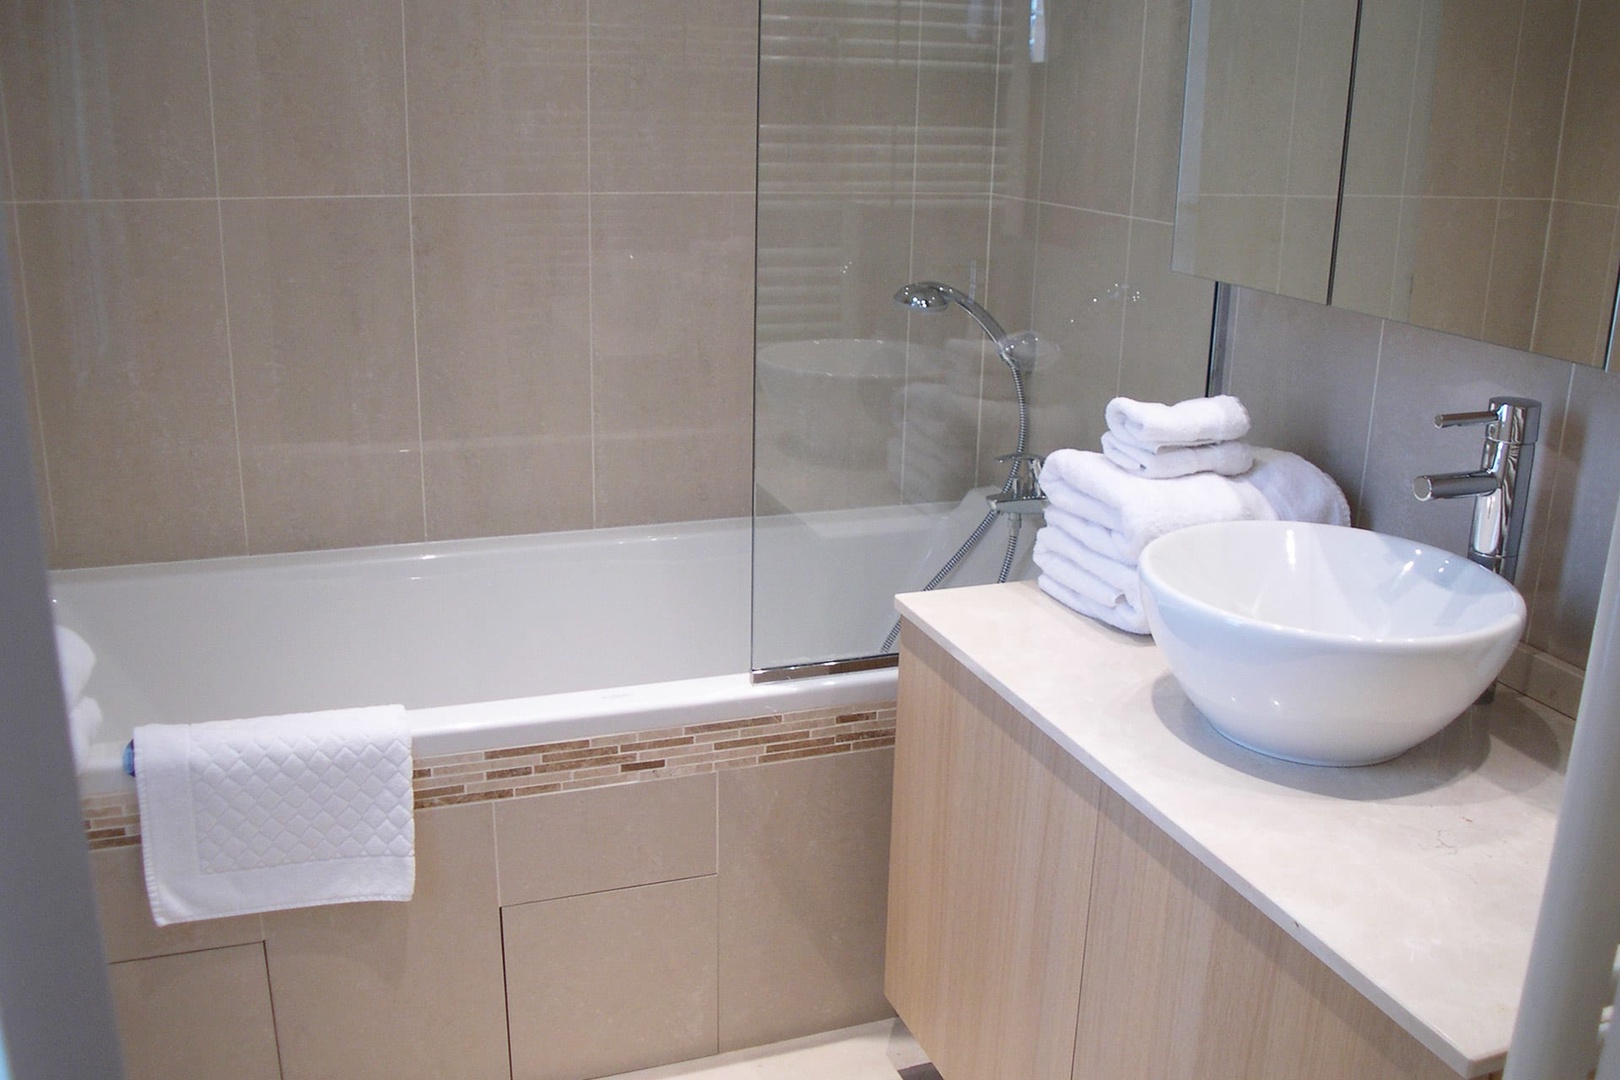 The en suite bathroom offers a tub for relaxing as well as a shower.